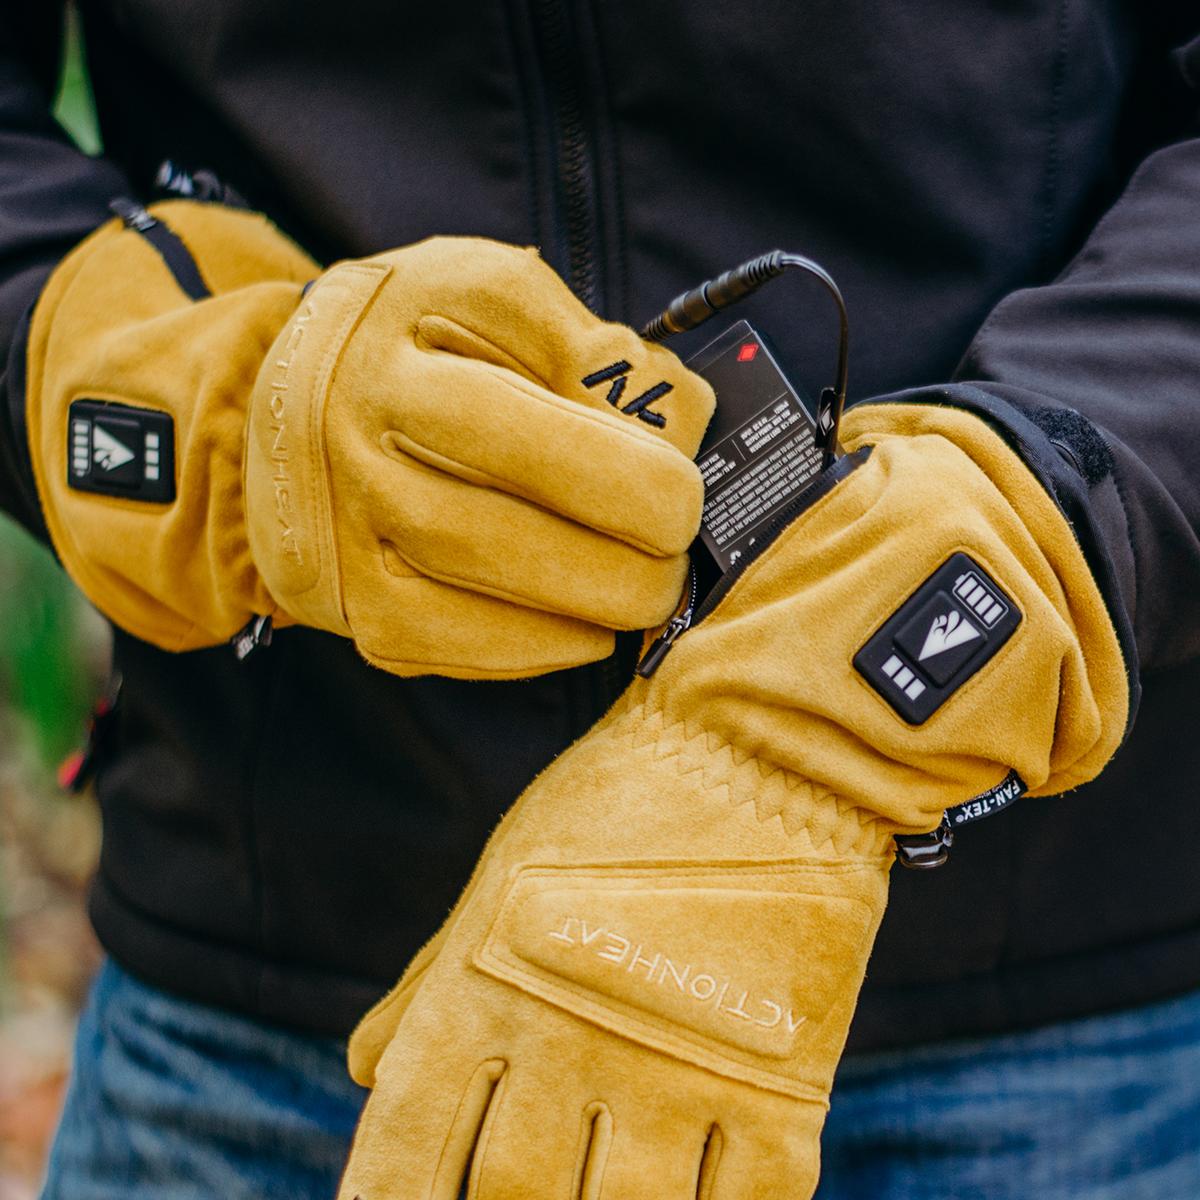 ActionHeat 7V Rugged Leather Heated Work Gloves - Info